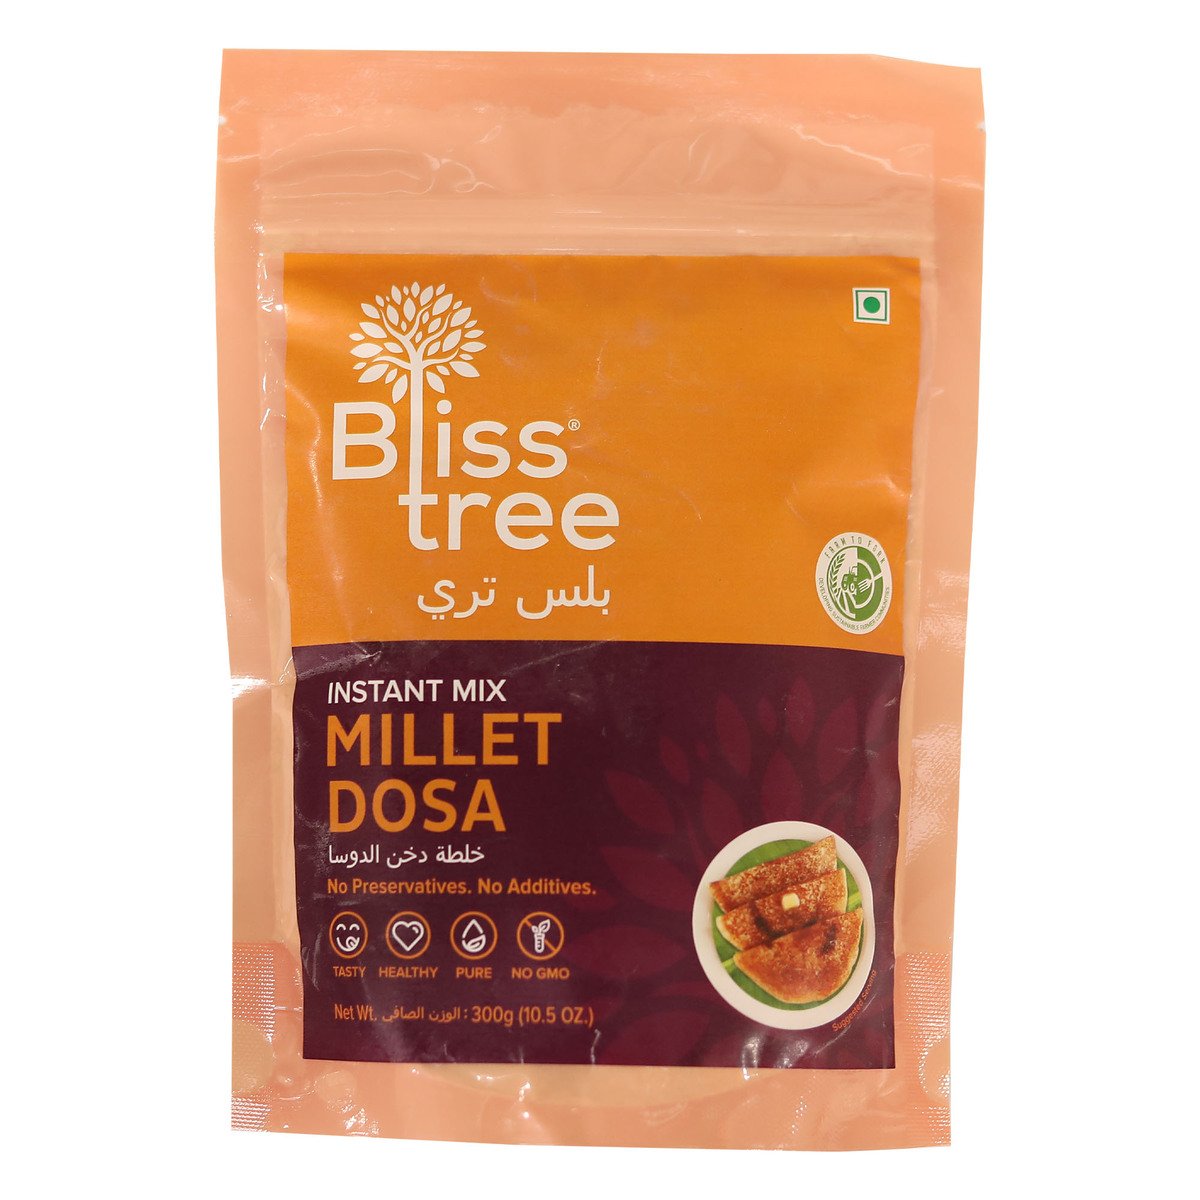 Bliss Tree Millet Dosa Instant Mix 300 g